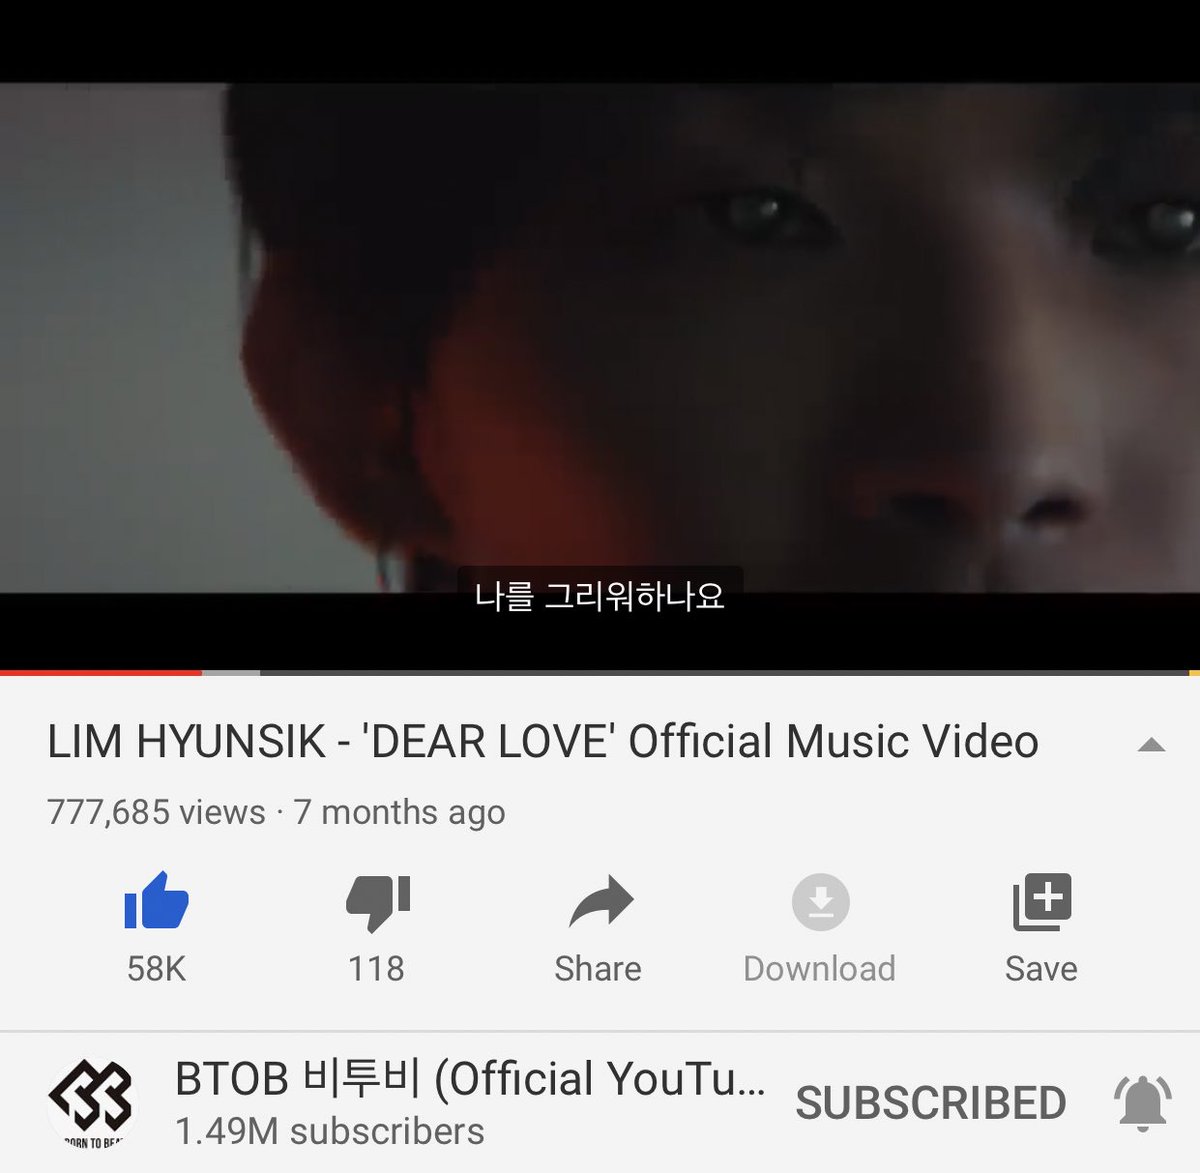 Dear Love view count streaming thread 26MAY2020 3:39PM KST777,685